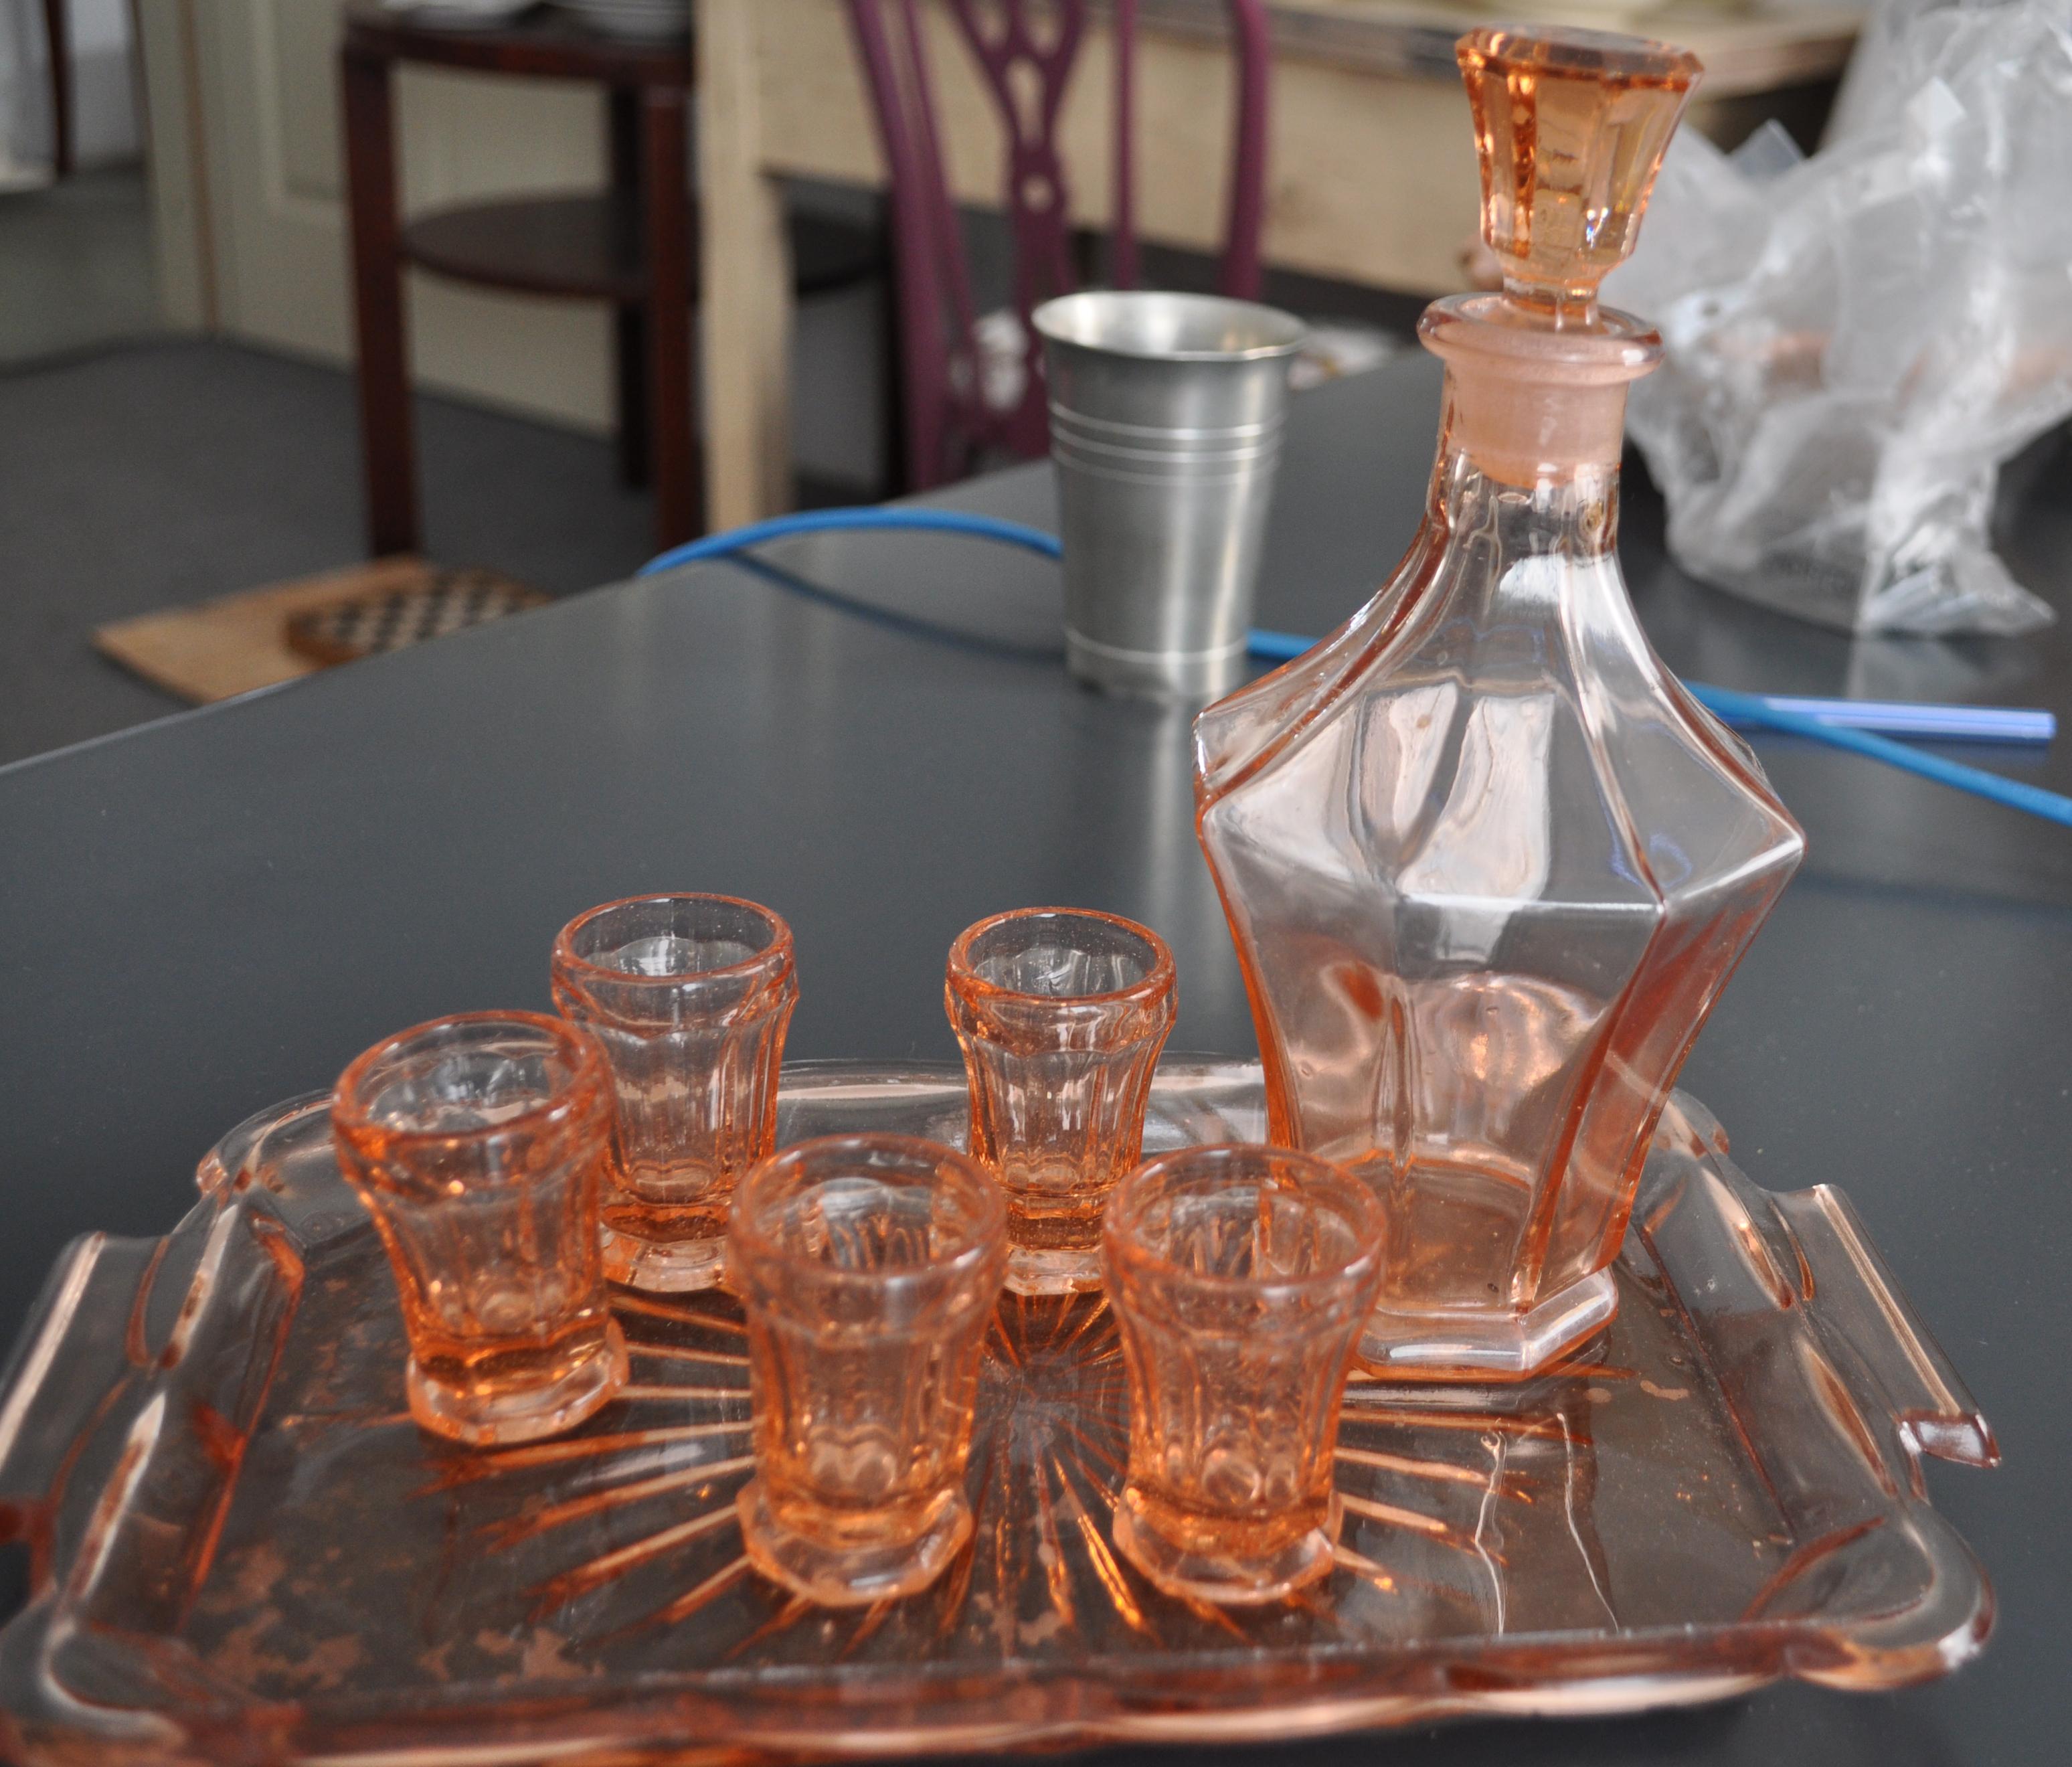 Art Deco Czech liqueur stock, peach-colored
good in original condition.
Tray size: 24 x 16 cm
1 bottle size: 20 cm
5 glasses size: 5.5 cm 3.5 Q
I have other blue and white stock, see image.